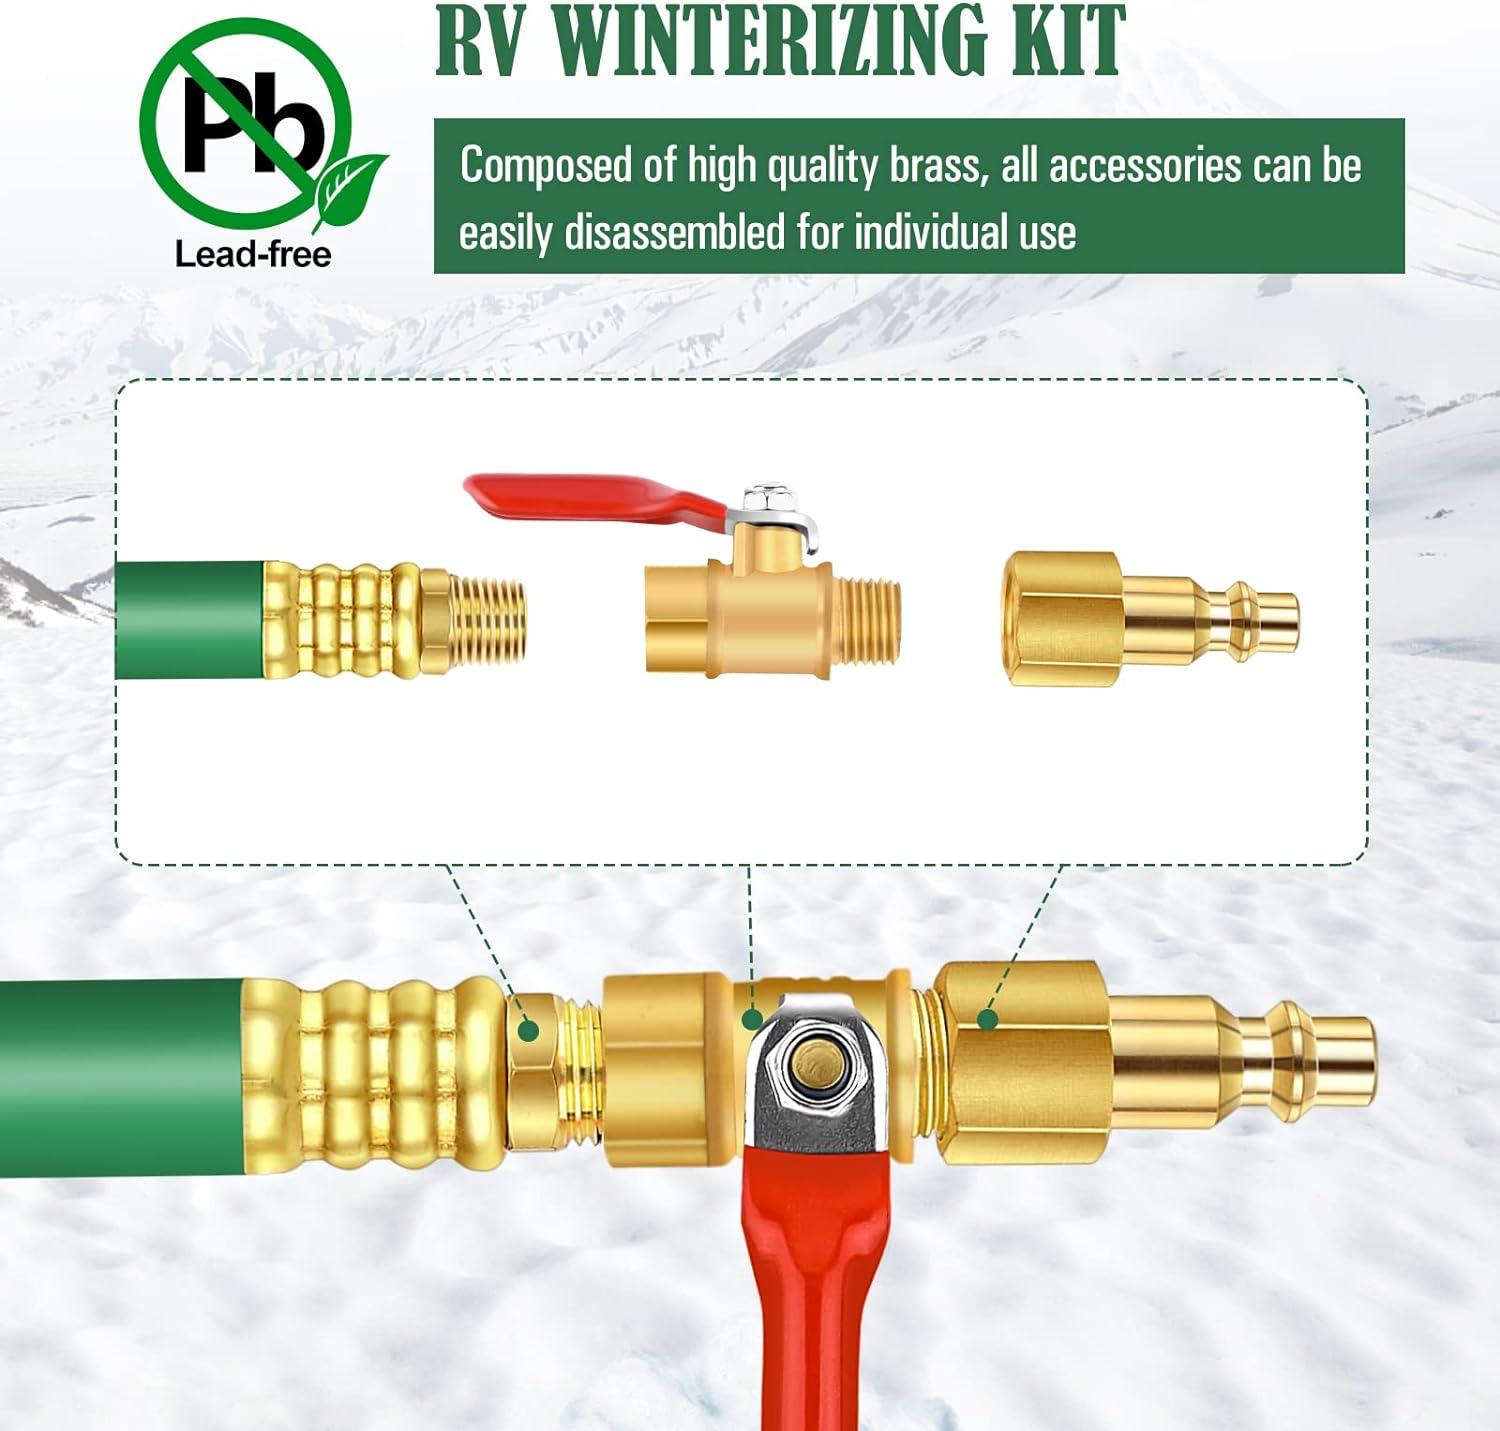 RV Winterizing Kit-Sprinkler Blowout Adapter Quick-Connect Plug Water Camper - Massive Discounts